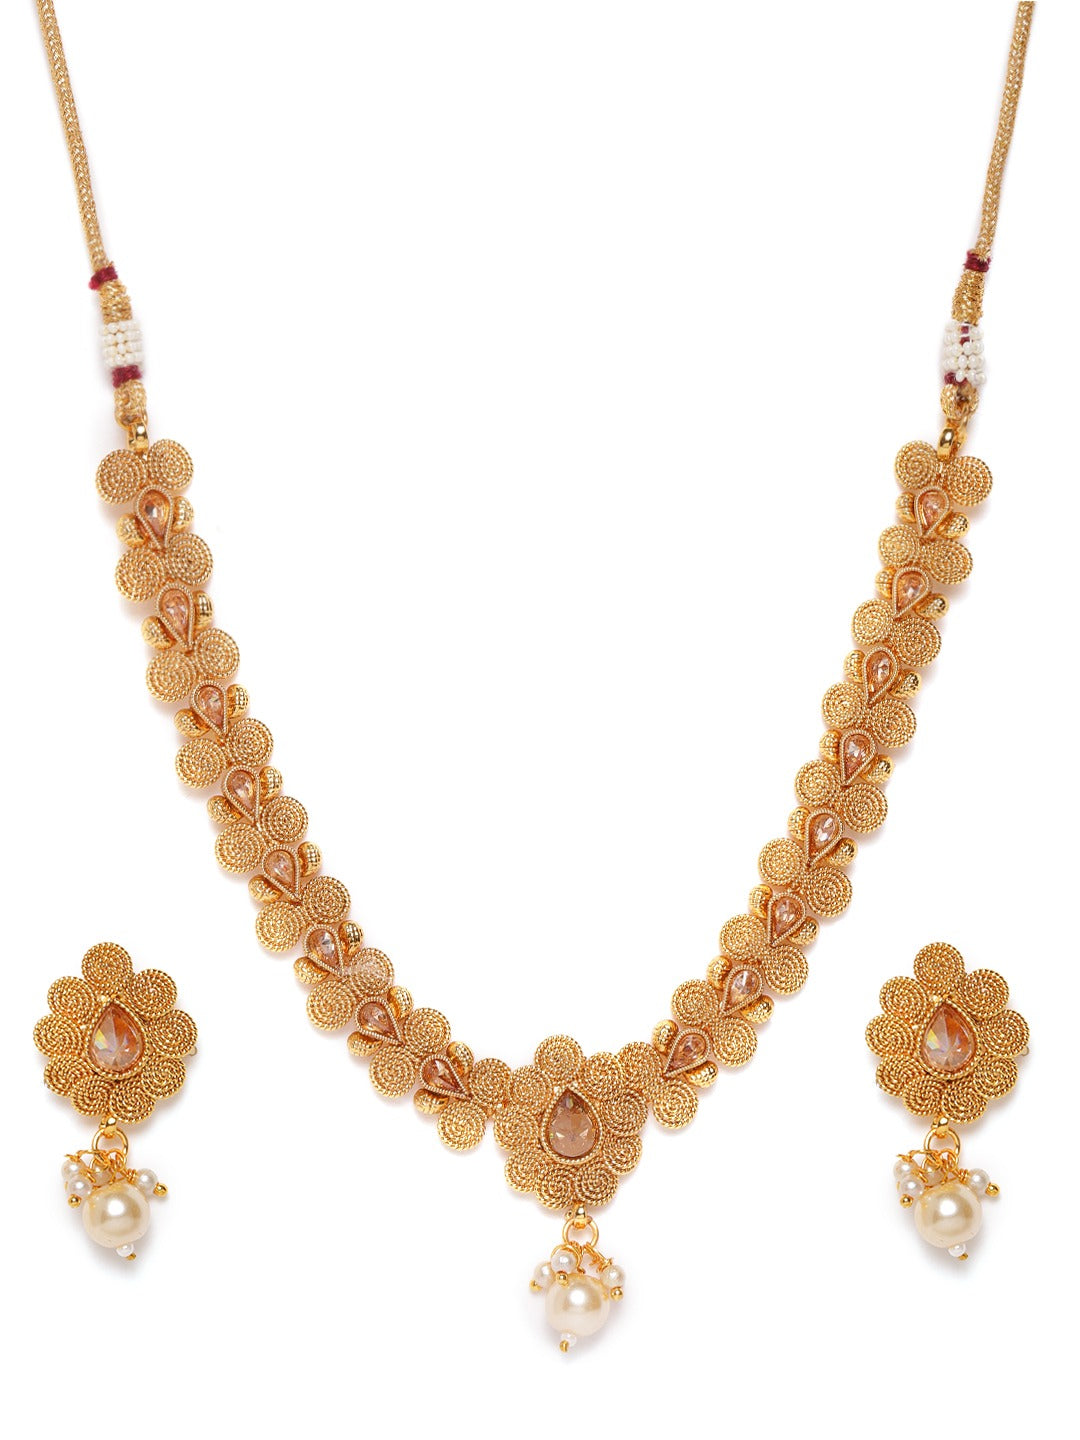 Off-White Gold-Plated Handcrafted Stone-Studded Beaded Jewellery Set ( American Diamond , Gold , Off White )